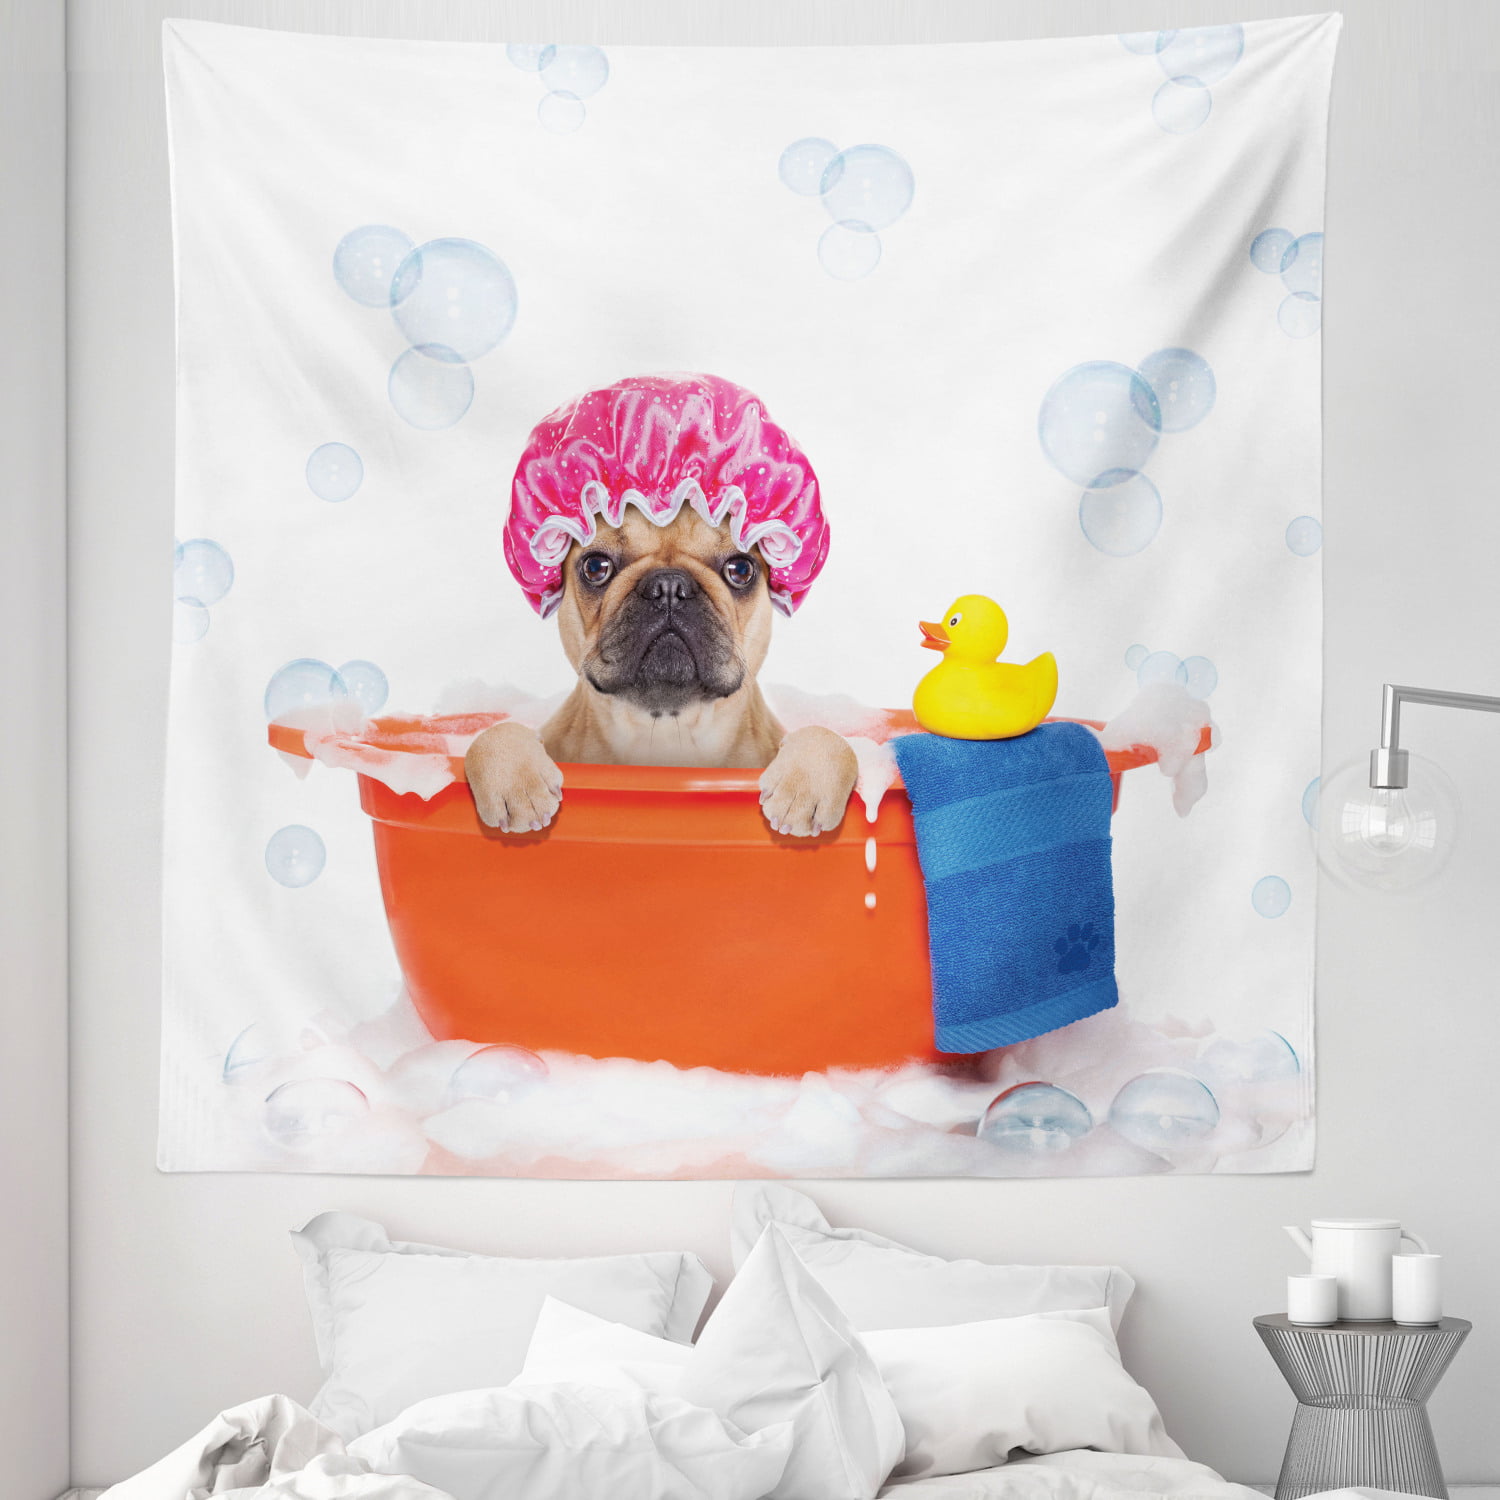 Dog Lover Tapestry, French Bulldog Having a Bath in Tub Rubber Duck Theme  on Bubbles Background, Fabric Wall Hanging Decor for Bedroom Living Room  Dorm, Sizes, Multicolor, by Ambesonne